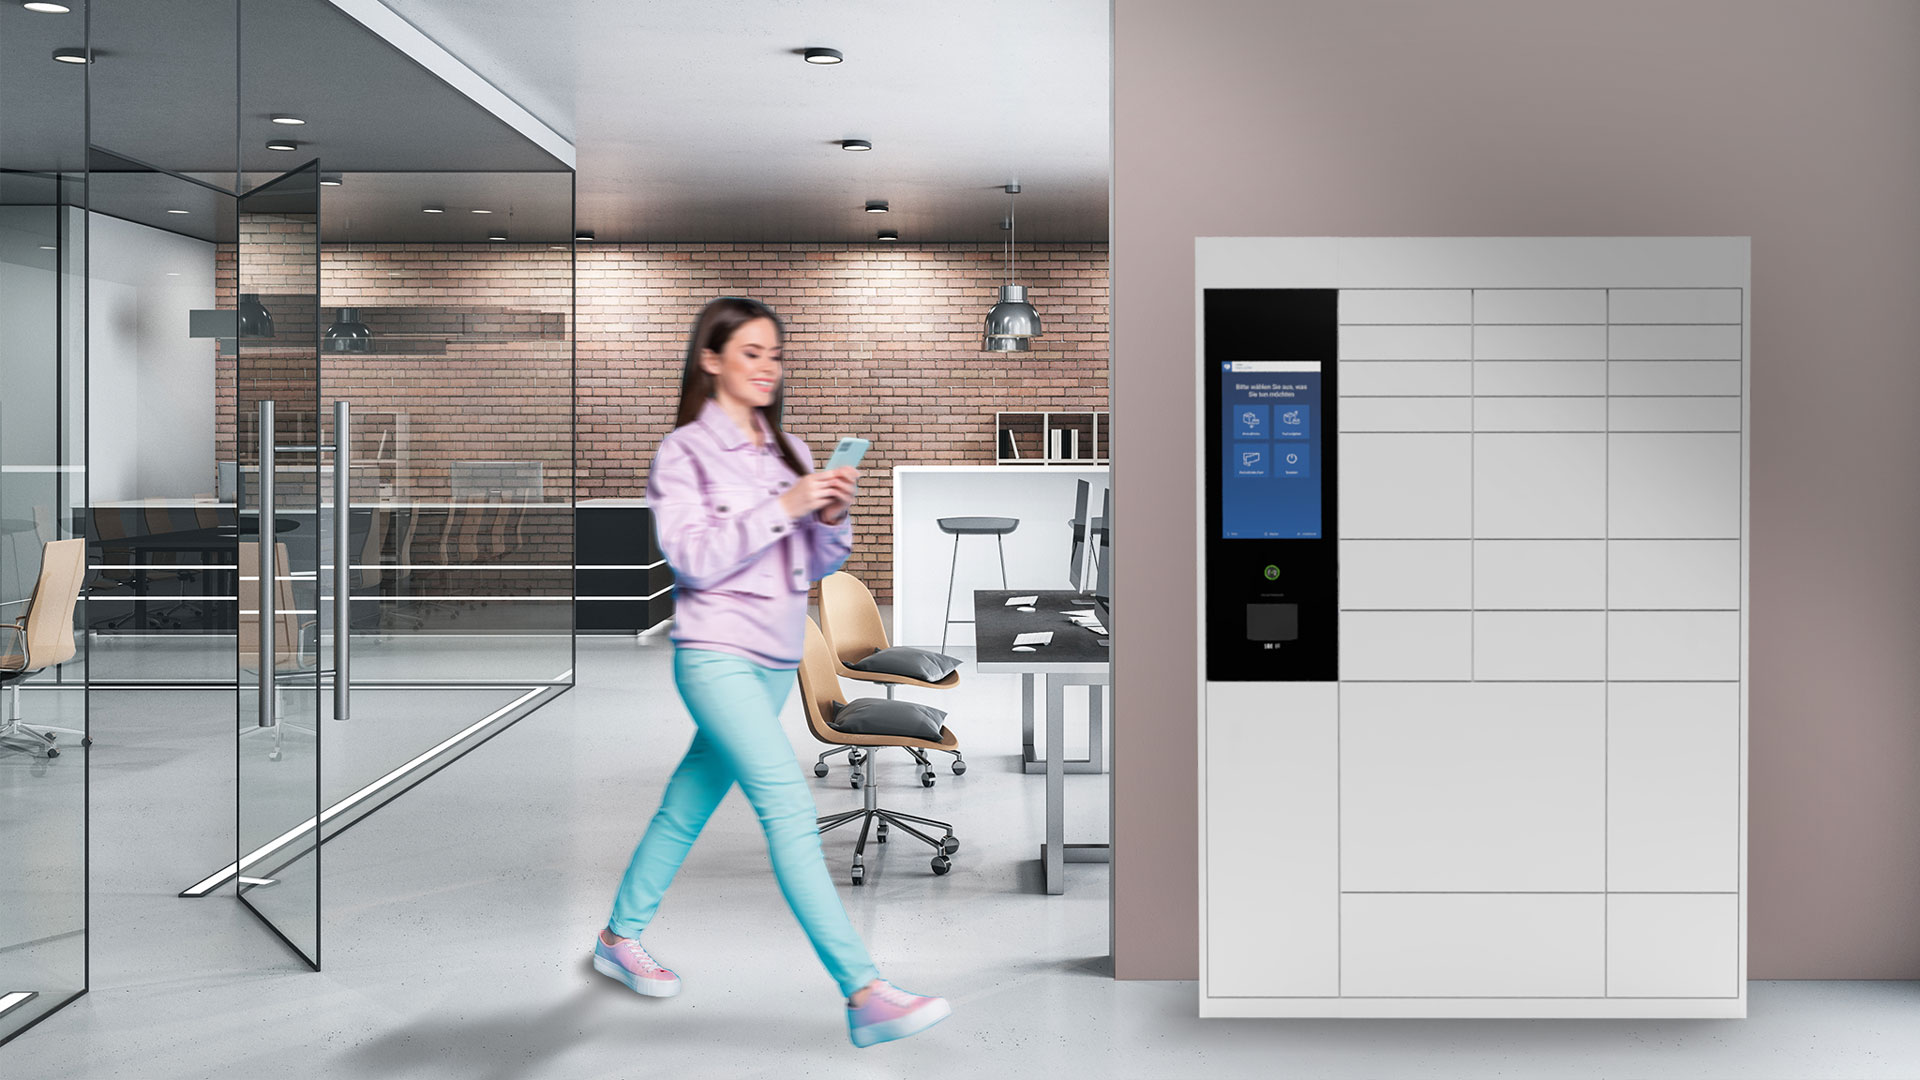 Smart locker systems are part of modern office environments